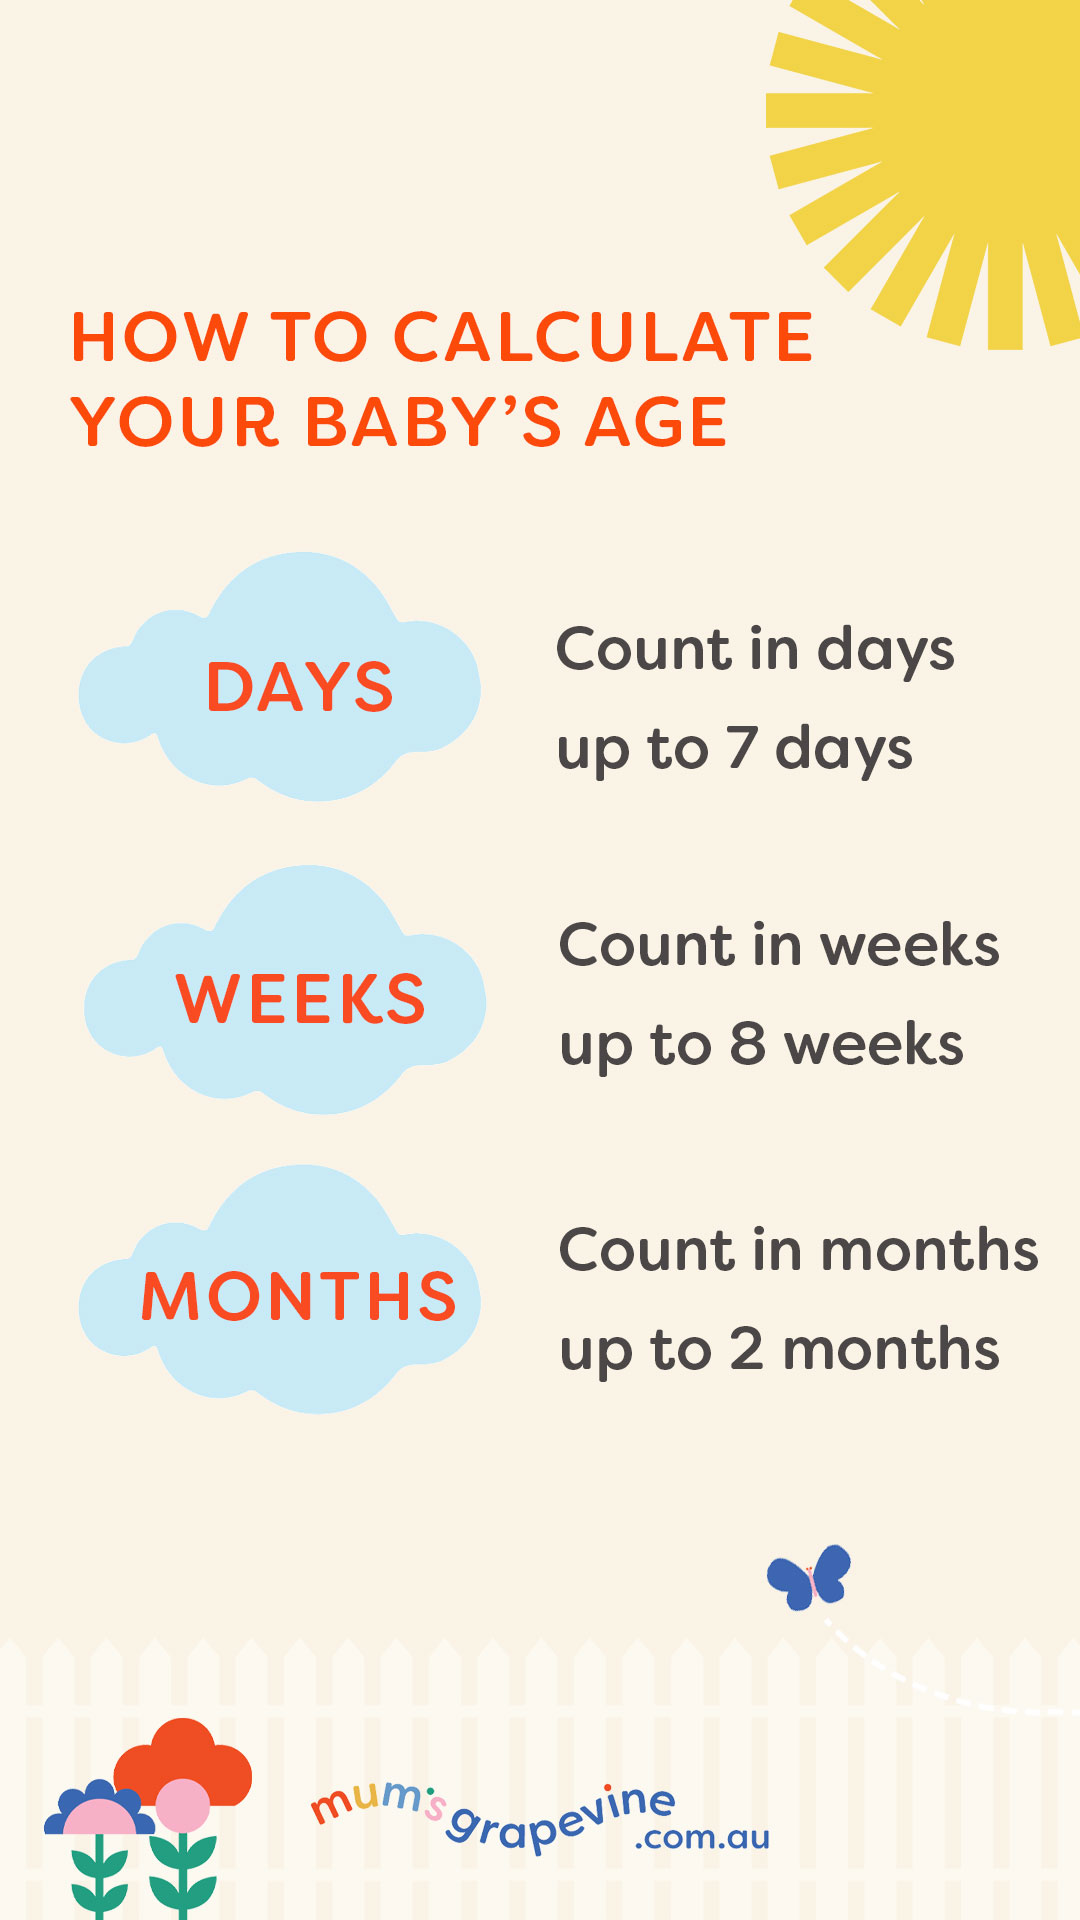 Formula shown on how to calculate your baby's age